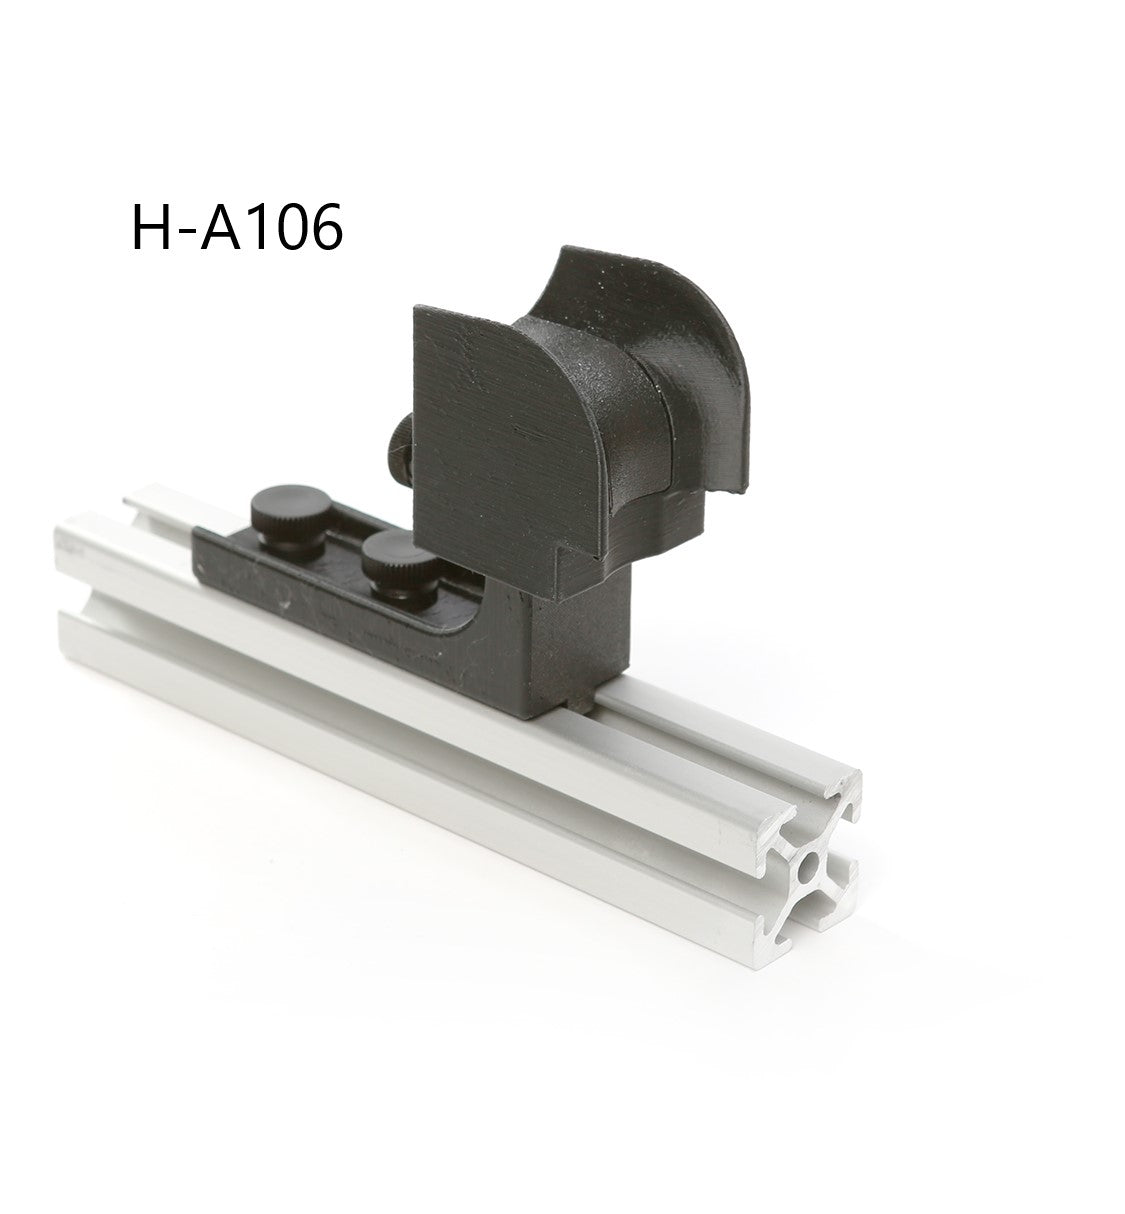 H-A106 NECK GLUING  CLAMP TO THE VIOLIN